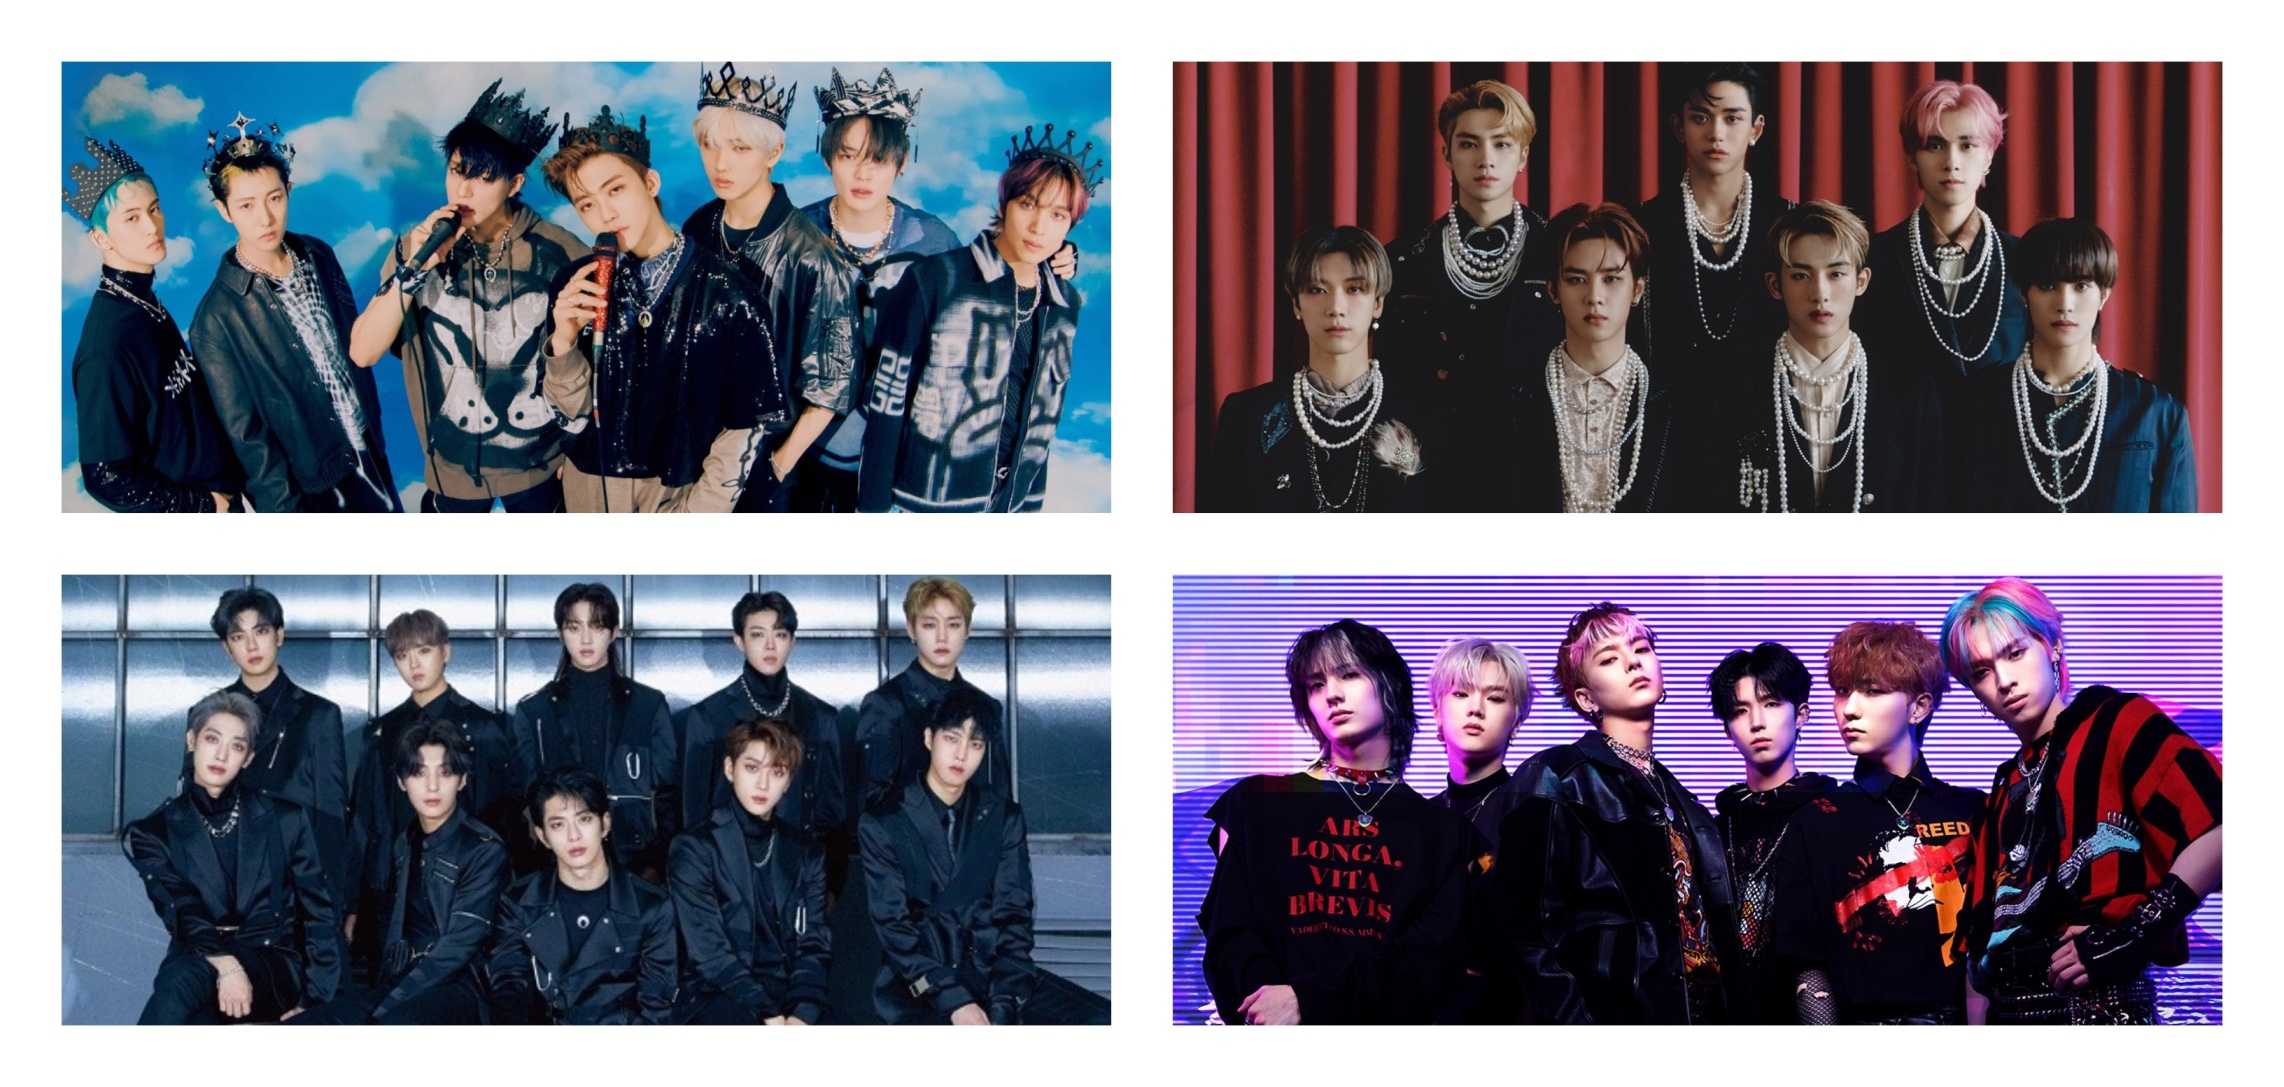 NCT Dream, WayV, Golden Child, & Xdinary Heroes to perform in Manila in October